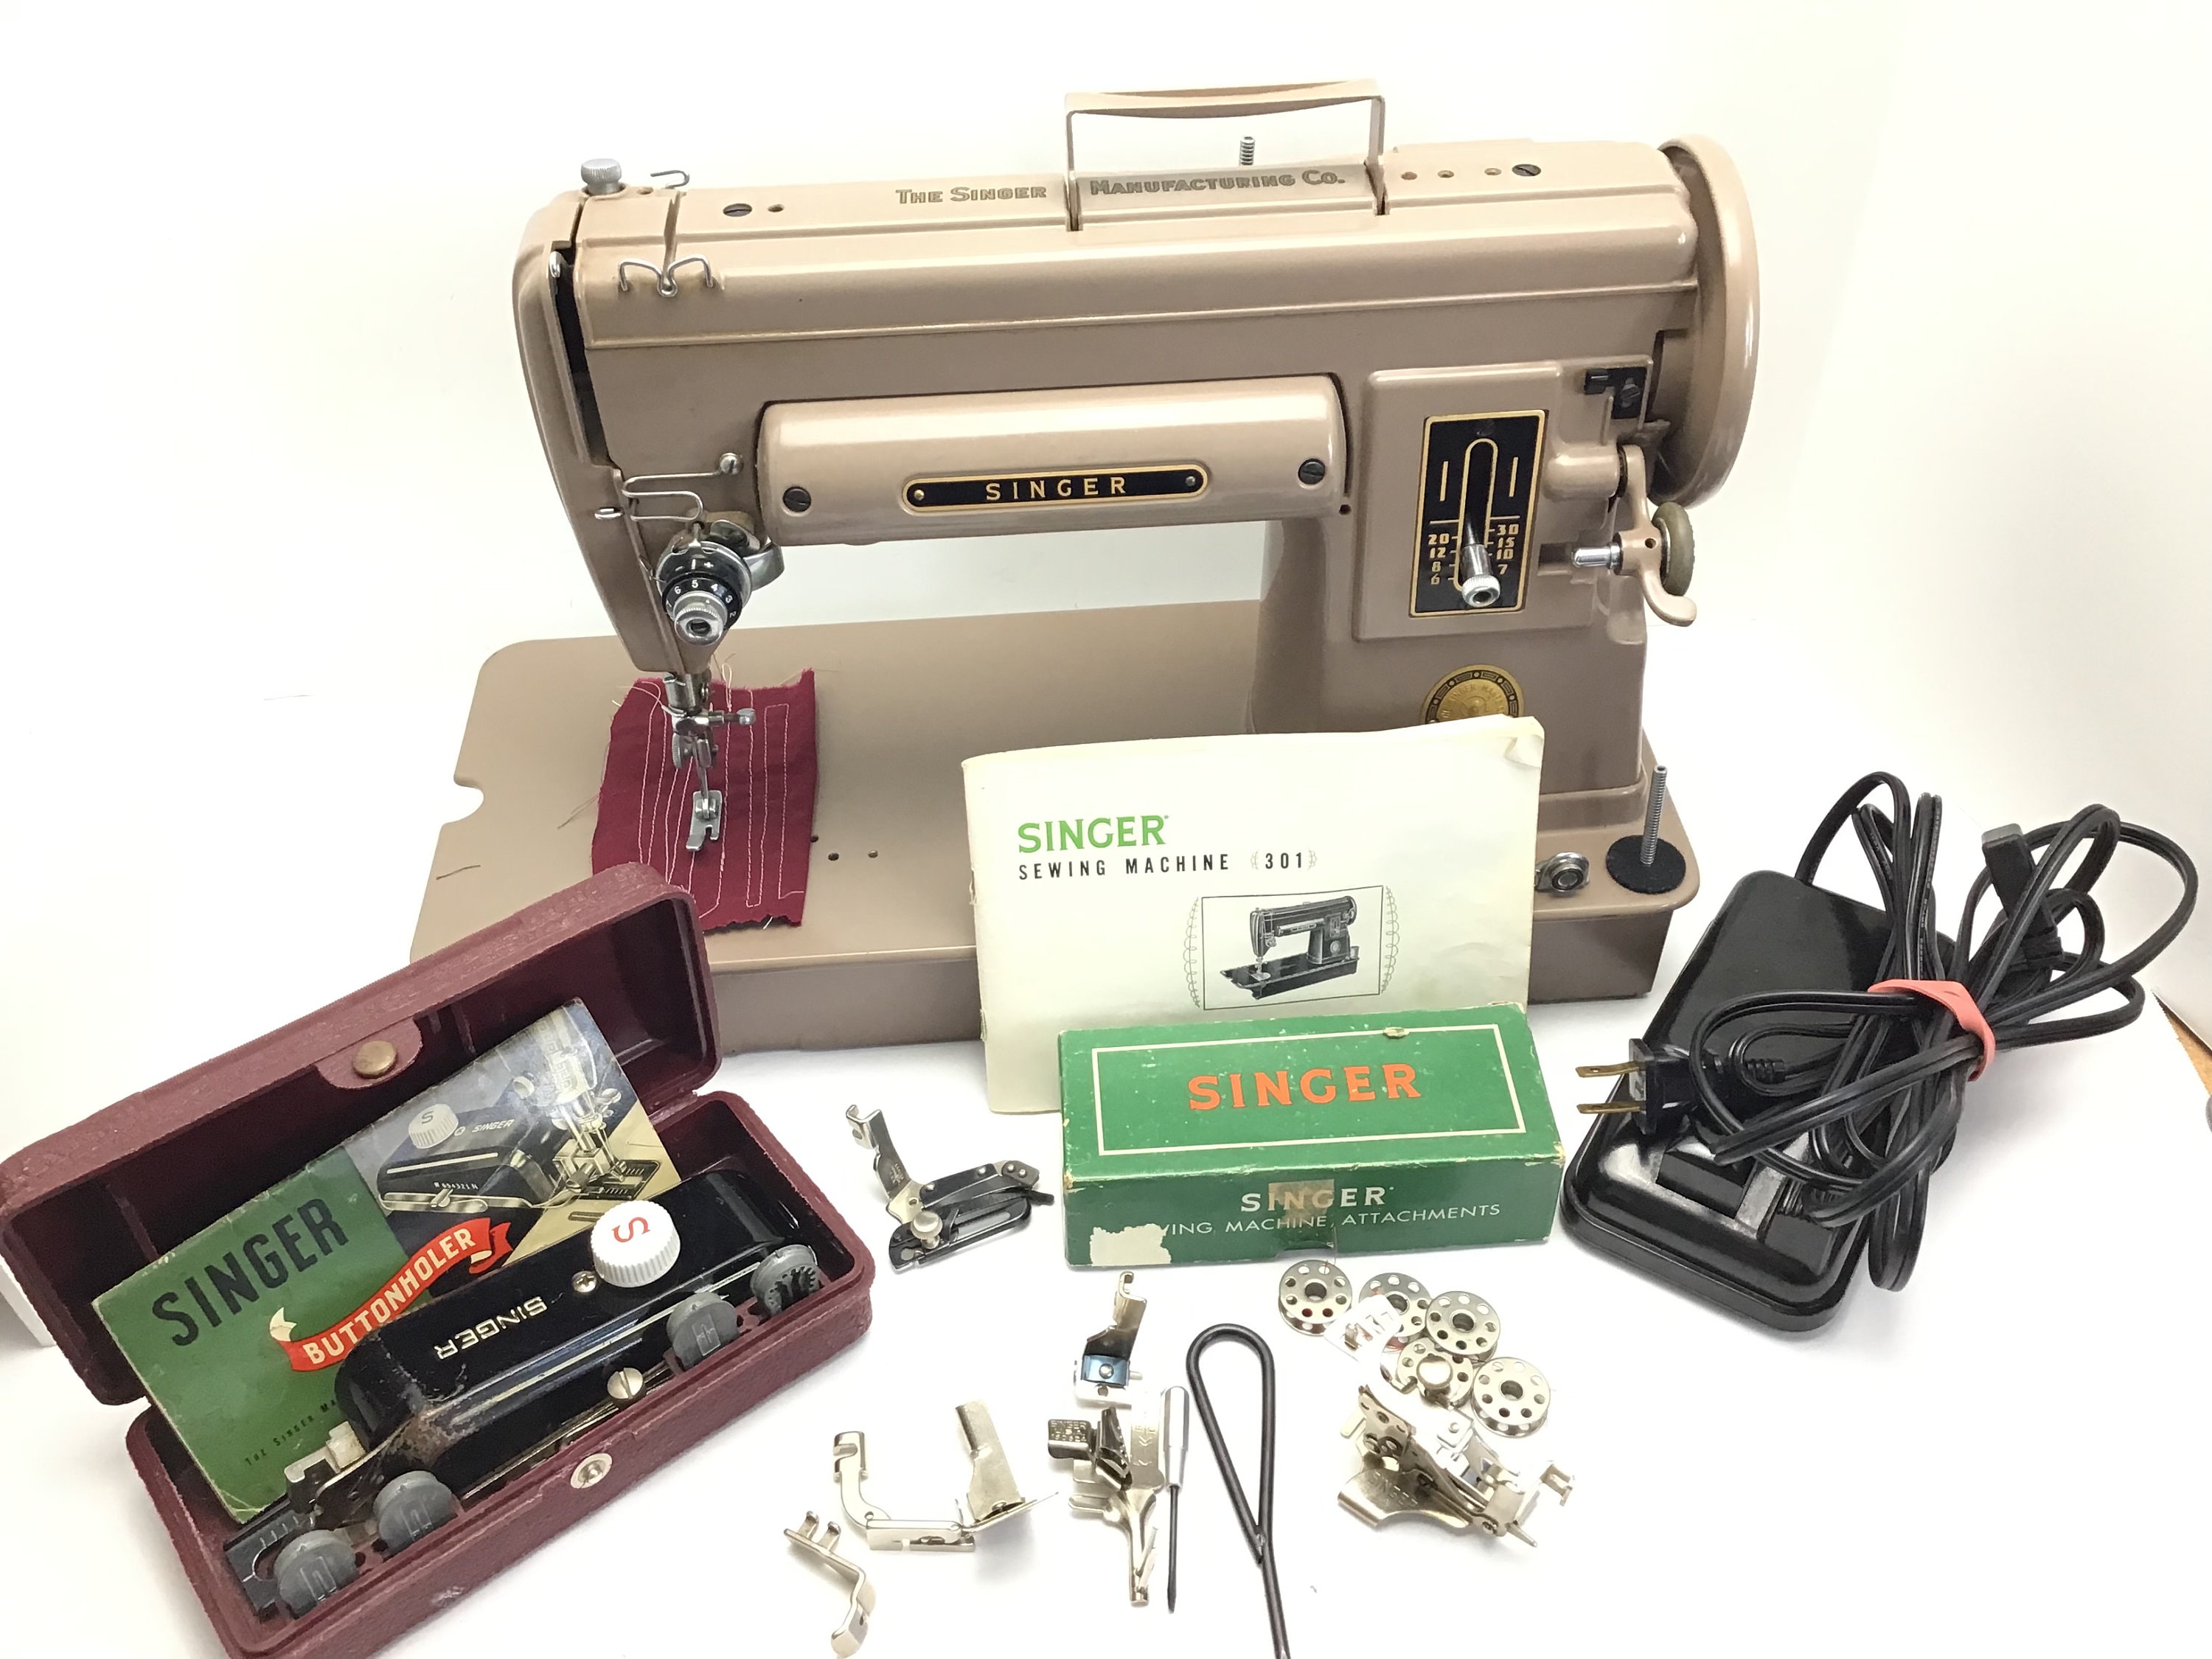 Vintage Singer Simanco Sewing Machine Accessories choose the ones you need